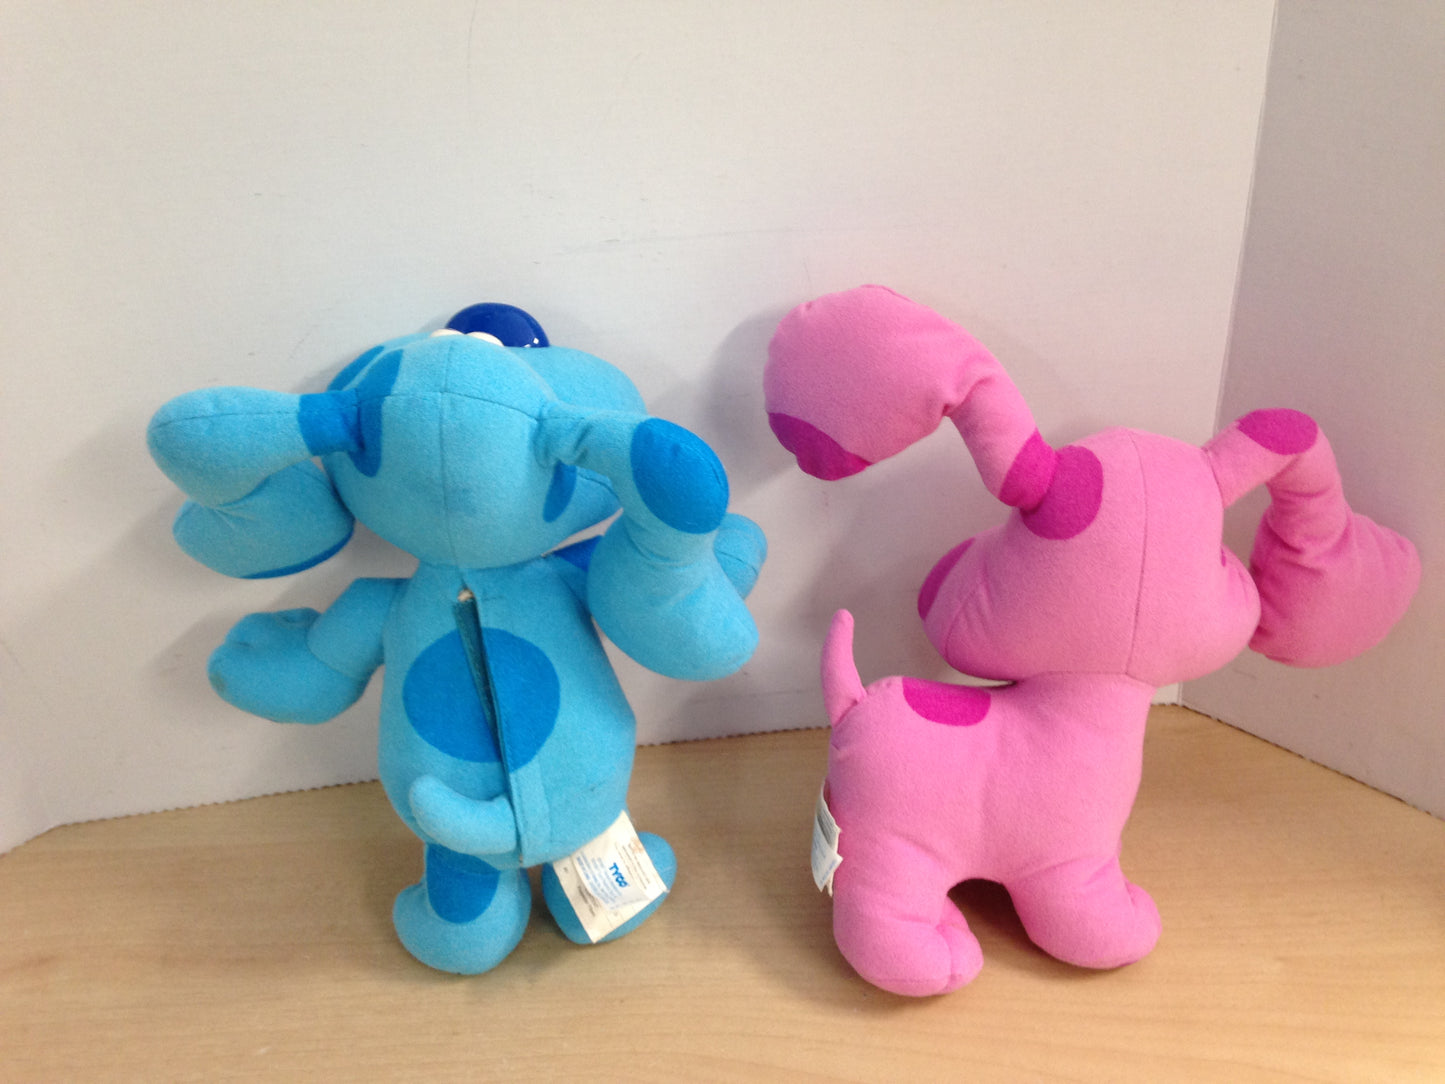 Blues Clues and Magenta Talking Plush Characters 10 and 12 inch